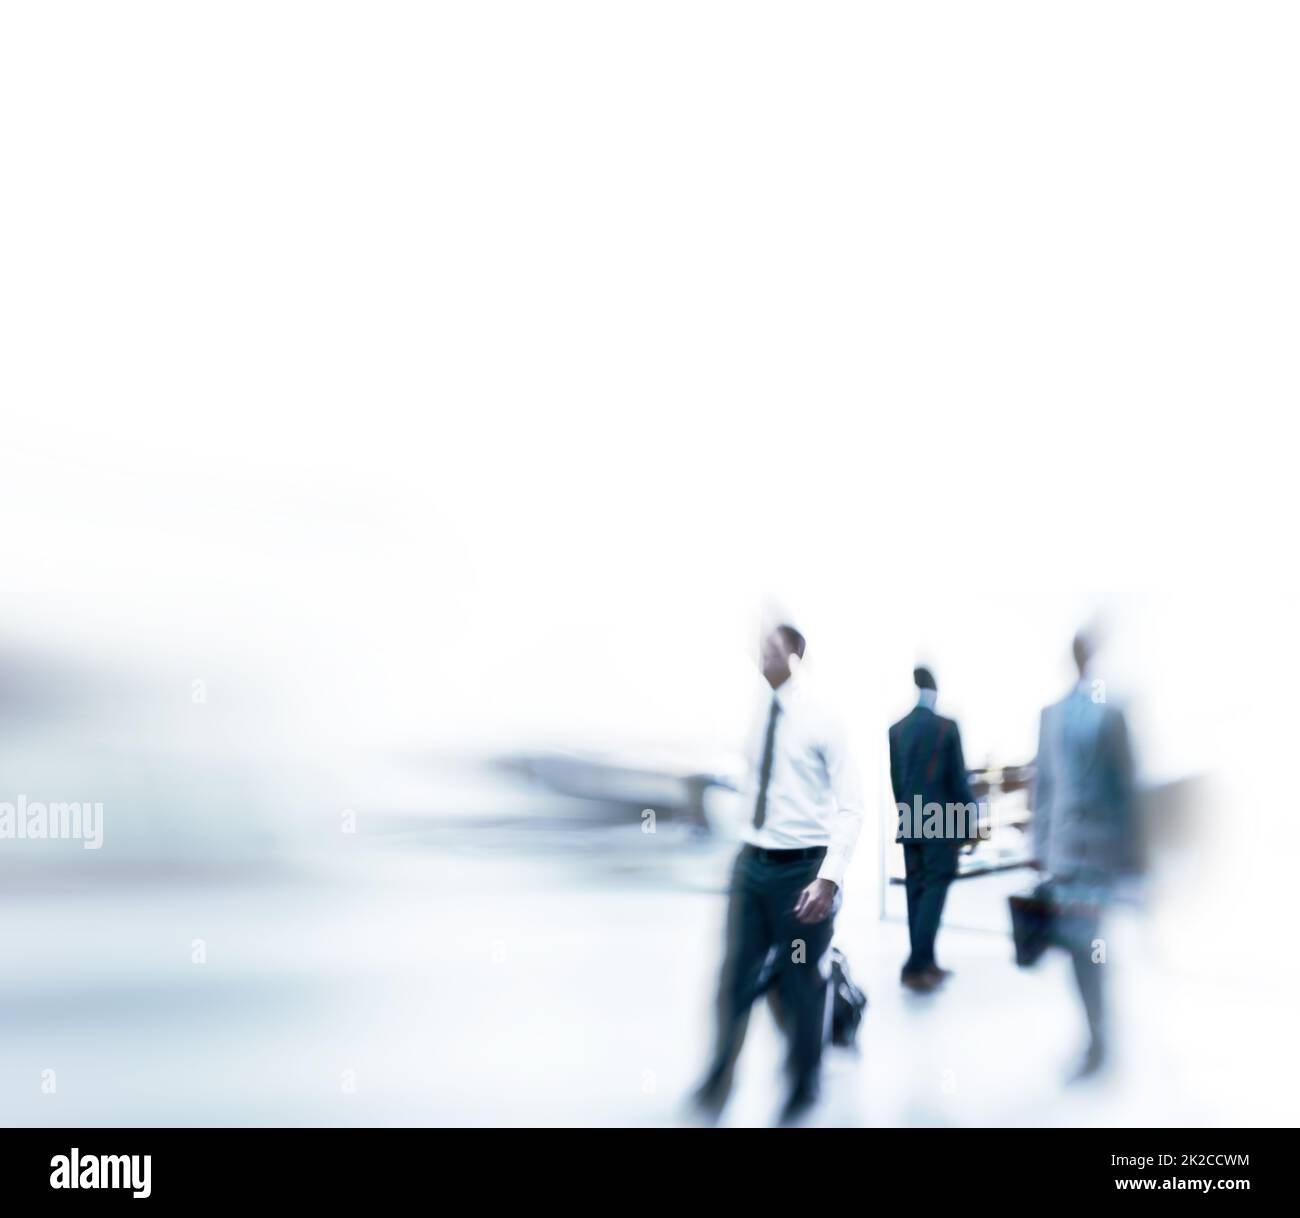 Rushing through the daily grind. Blurred shot of a businesspeople commuting. Stock Photo